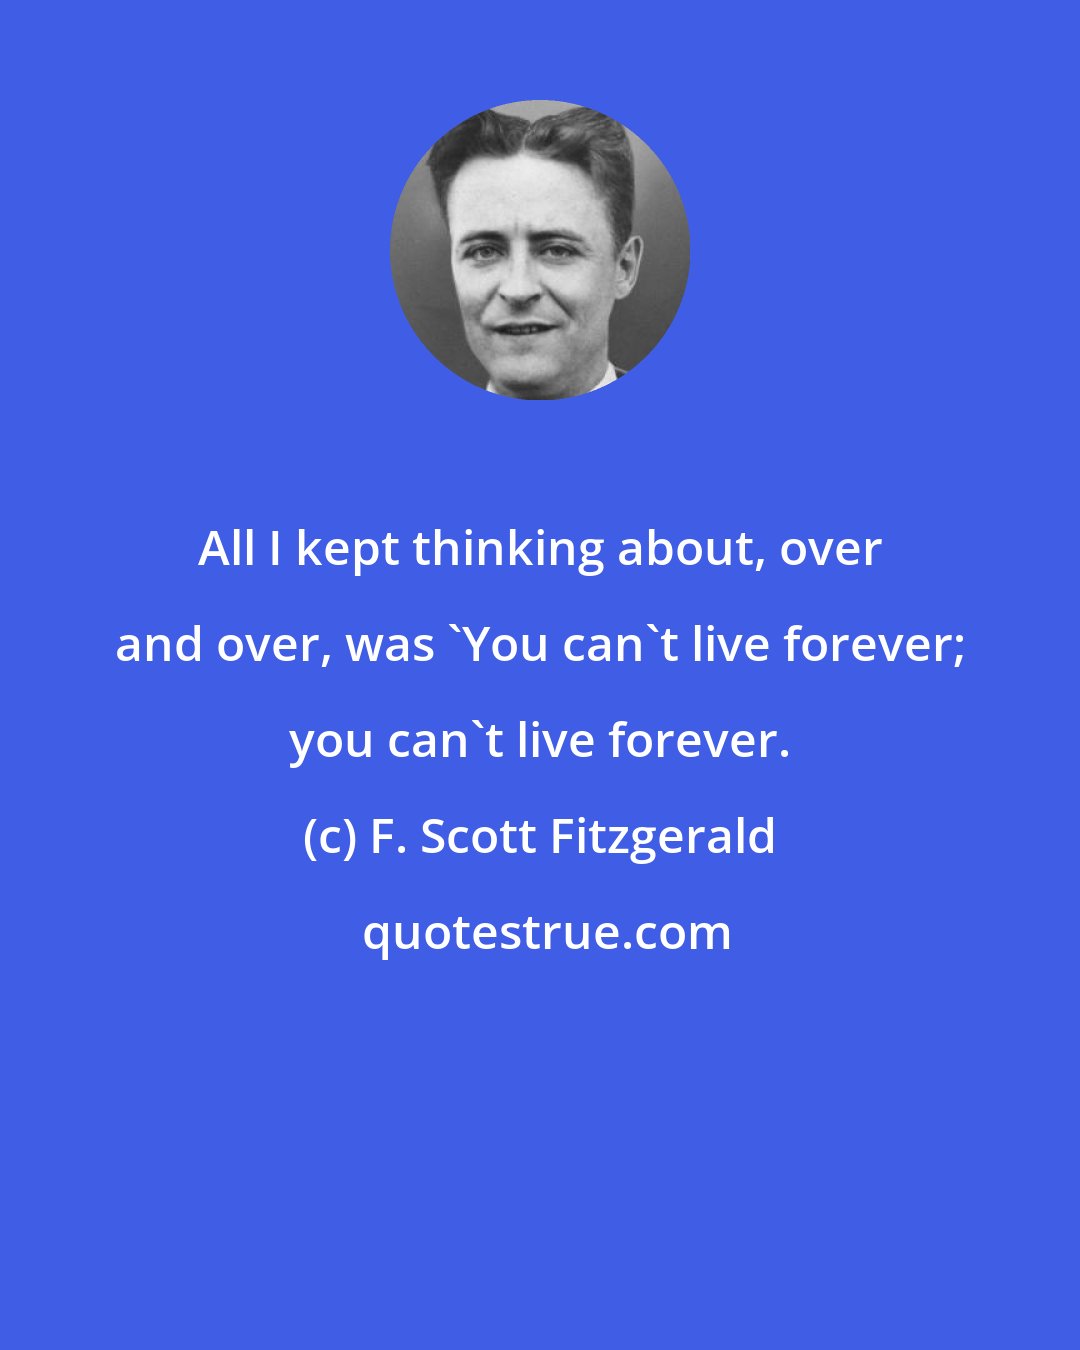 F. Scott Fitzgerald: All I kept thinking about, over and over, was 'You can't live forever; you can't live forever.